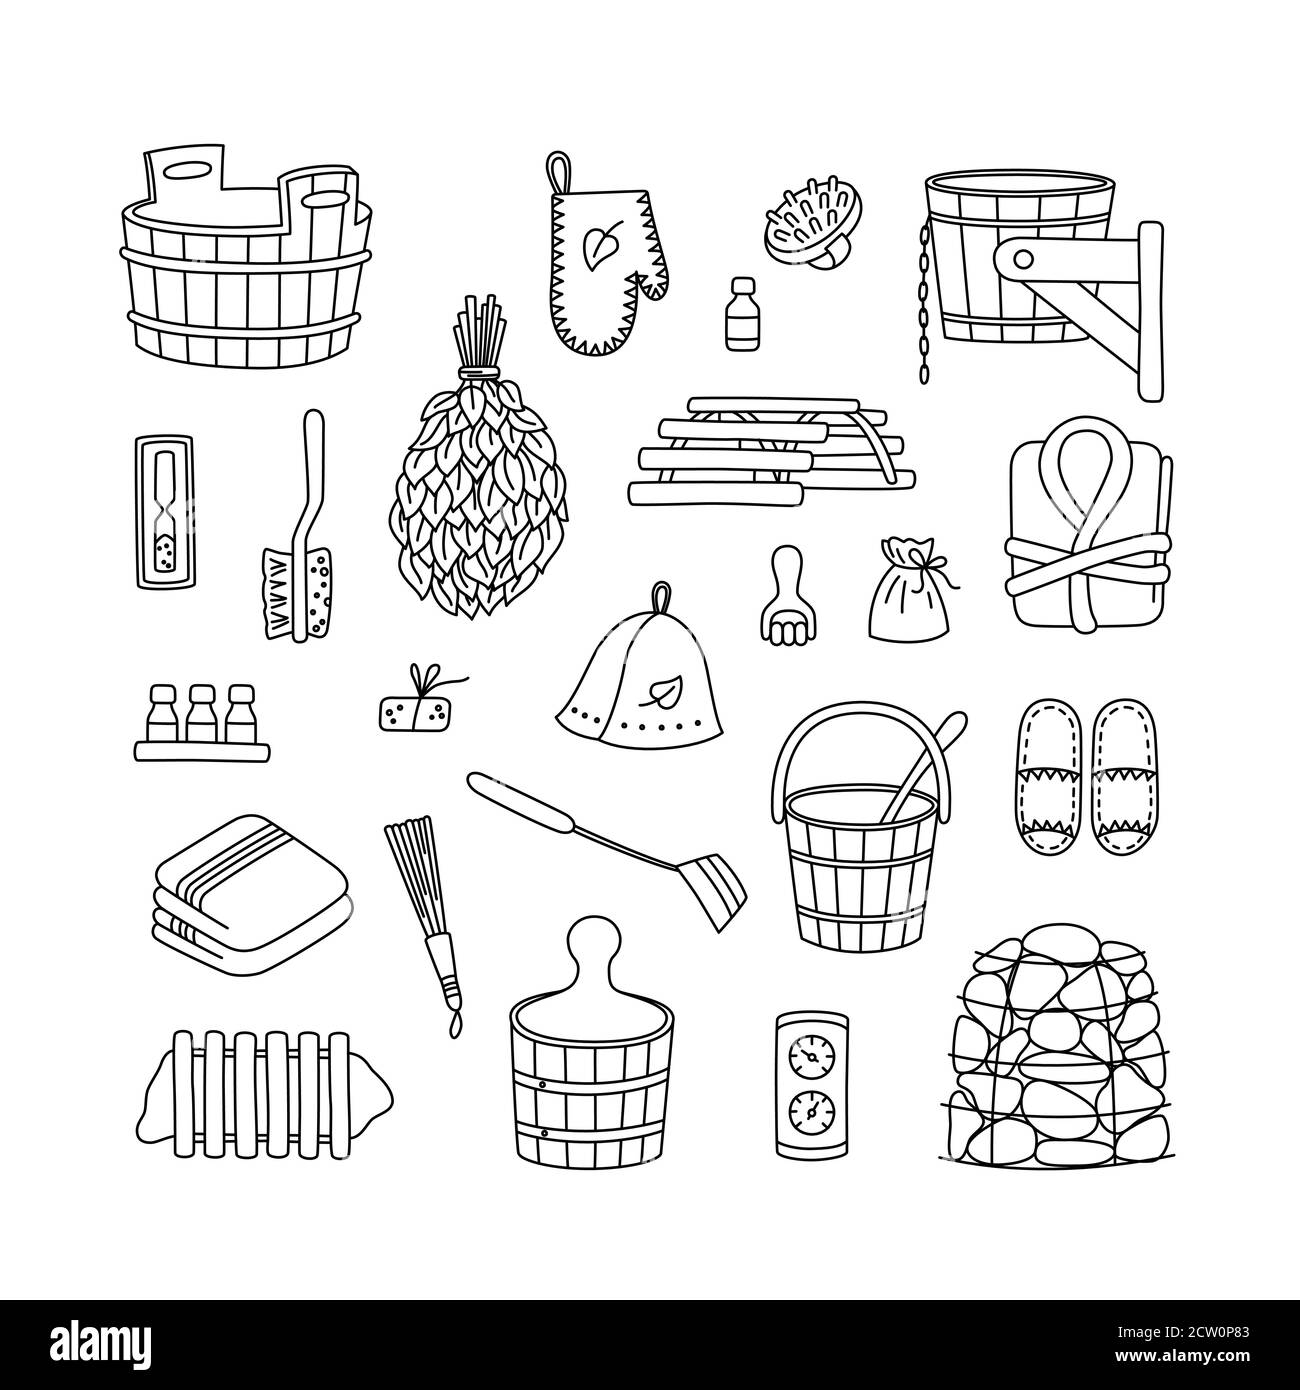 Sauna accessories - washer, broom, tub, bucket, towel and other. Bath accessories made of wood. Stock Vector